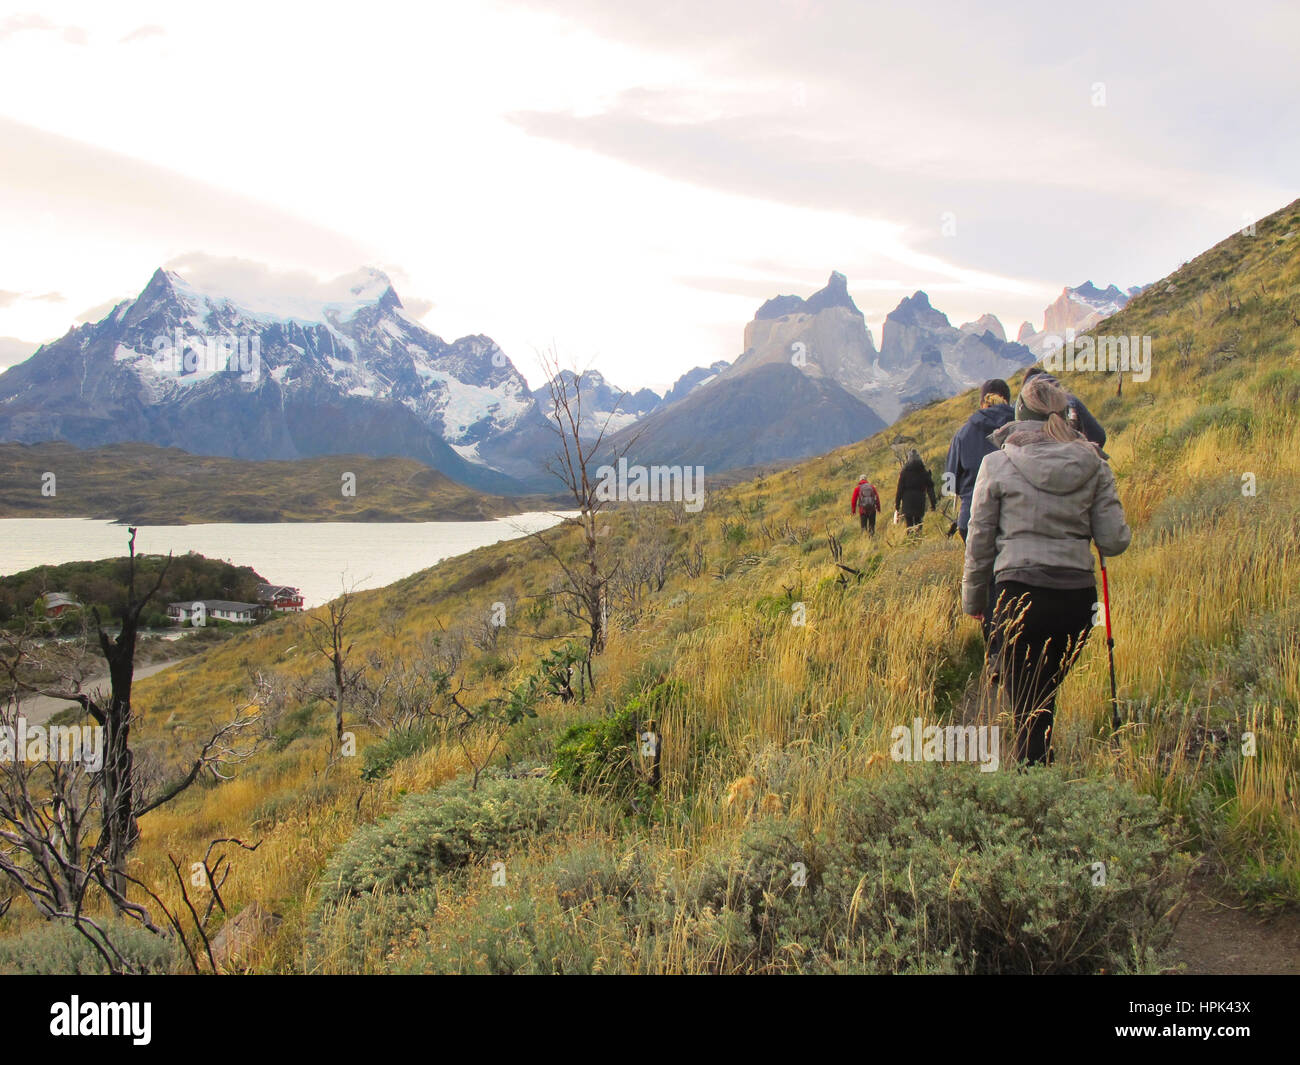 Trekking in Torres del Paine National Park, Patagonia Chile Stock Photo